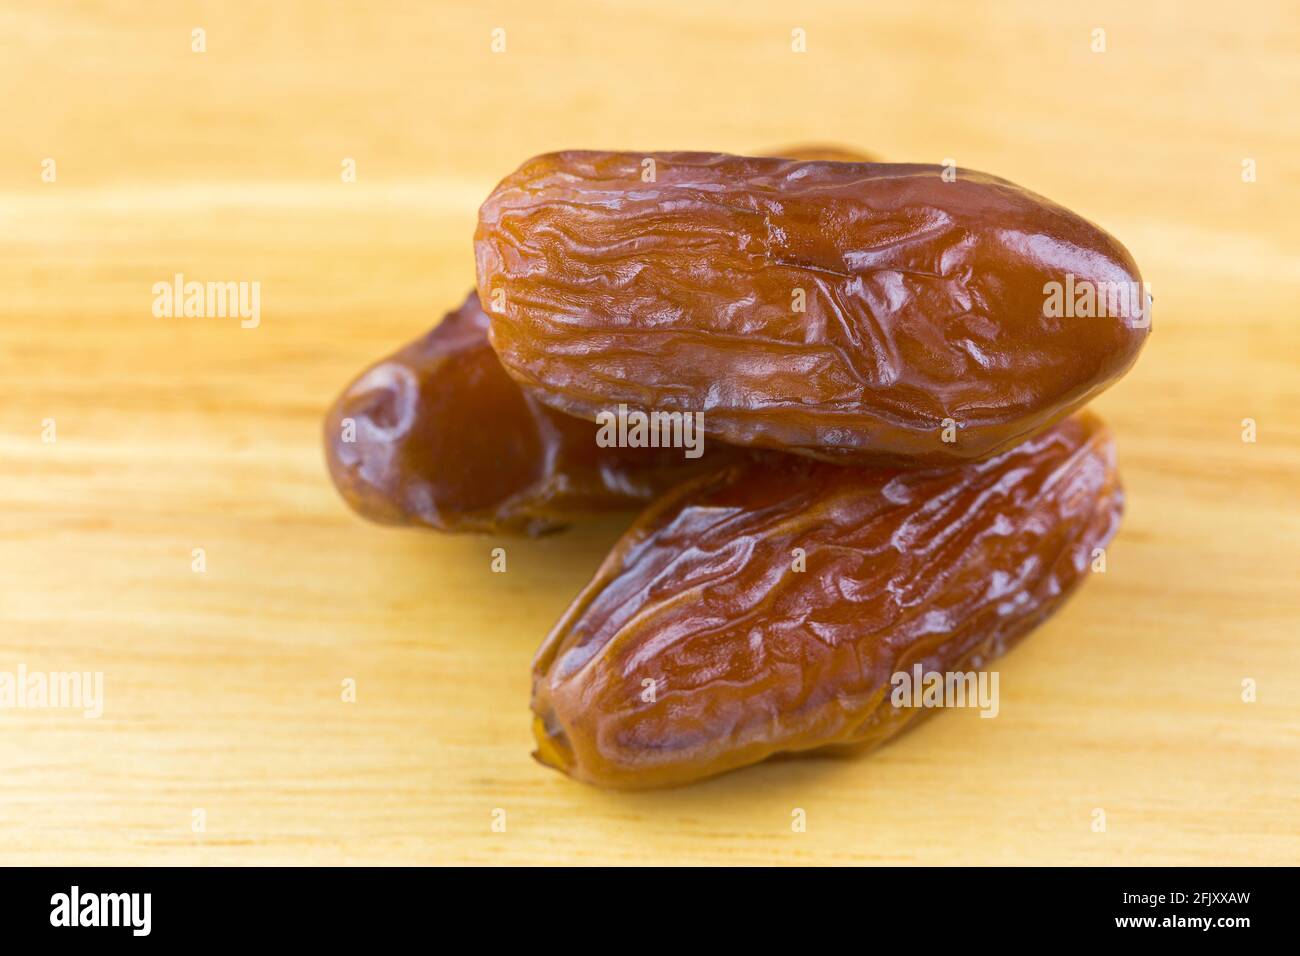 Closeup of natural dried dates fruit on wooden background (Phoenix dactylifera) Stock Photo